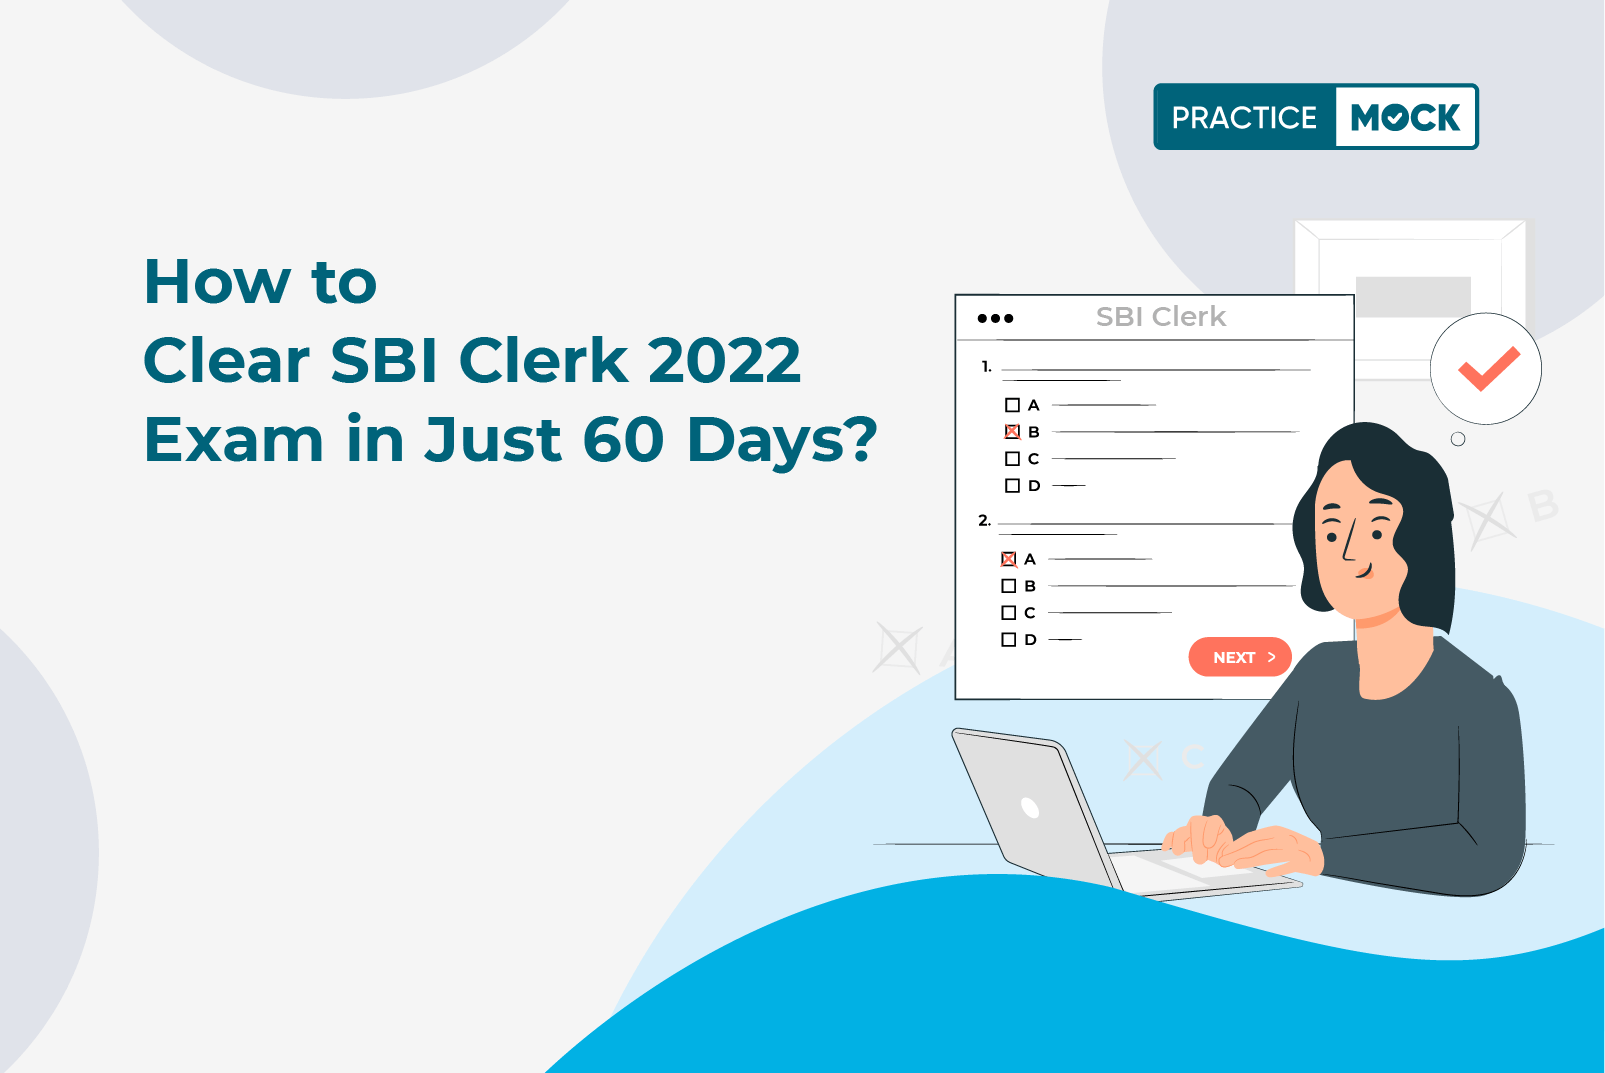 How to clear SBI Clerk 2022 Exam in just 60 Days?